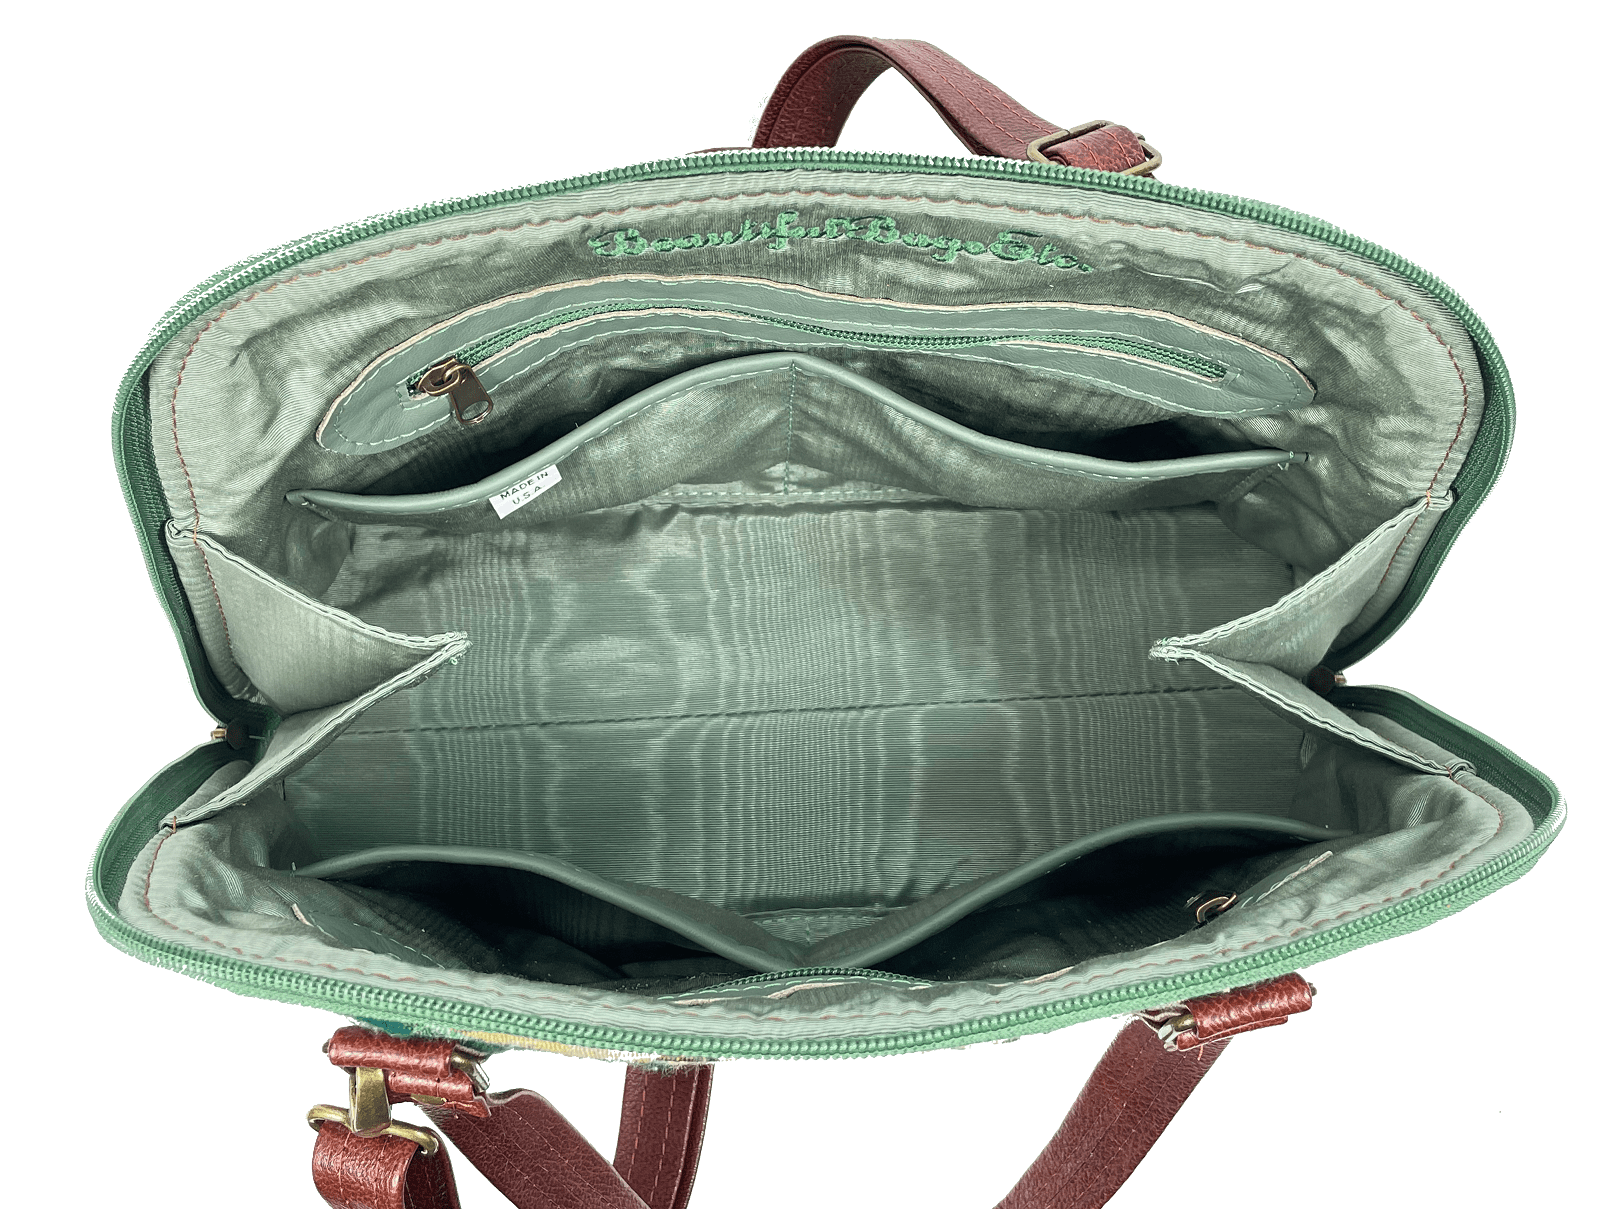 Rebecca’s Emerald Garden Tapestry and Leather Bowler Bag  interior view